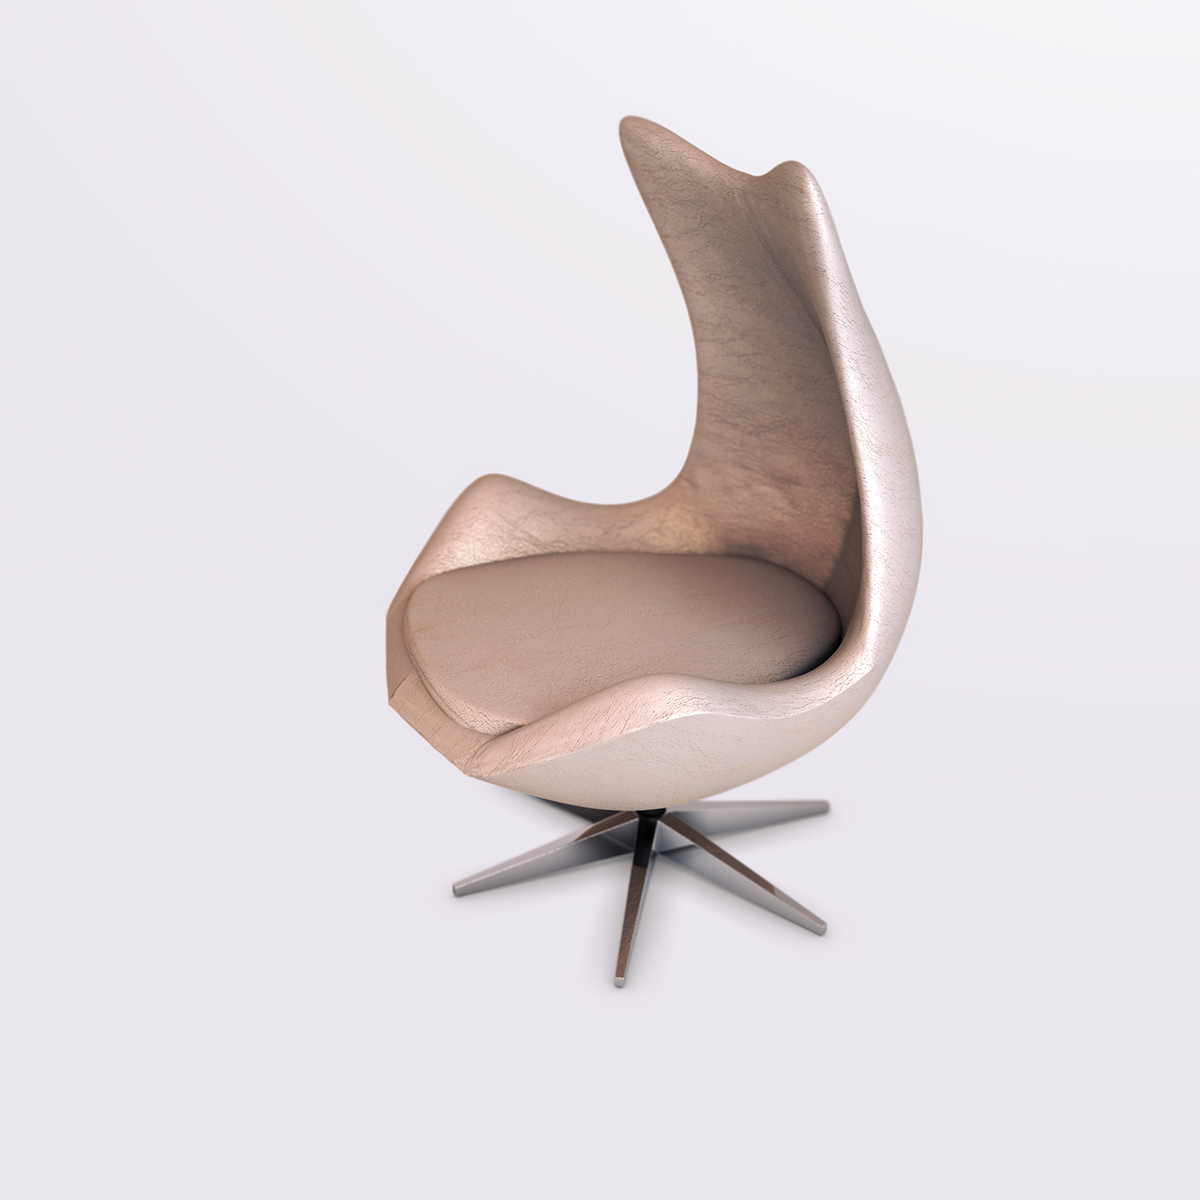 visualisation 3D CG leather chair texturing modelling lighting materials Textiles